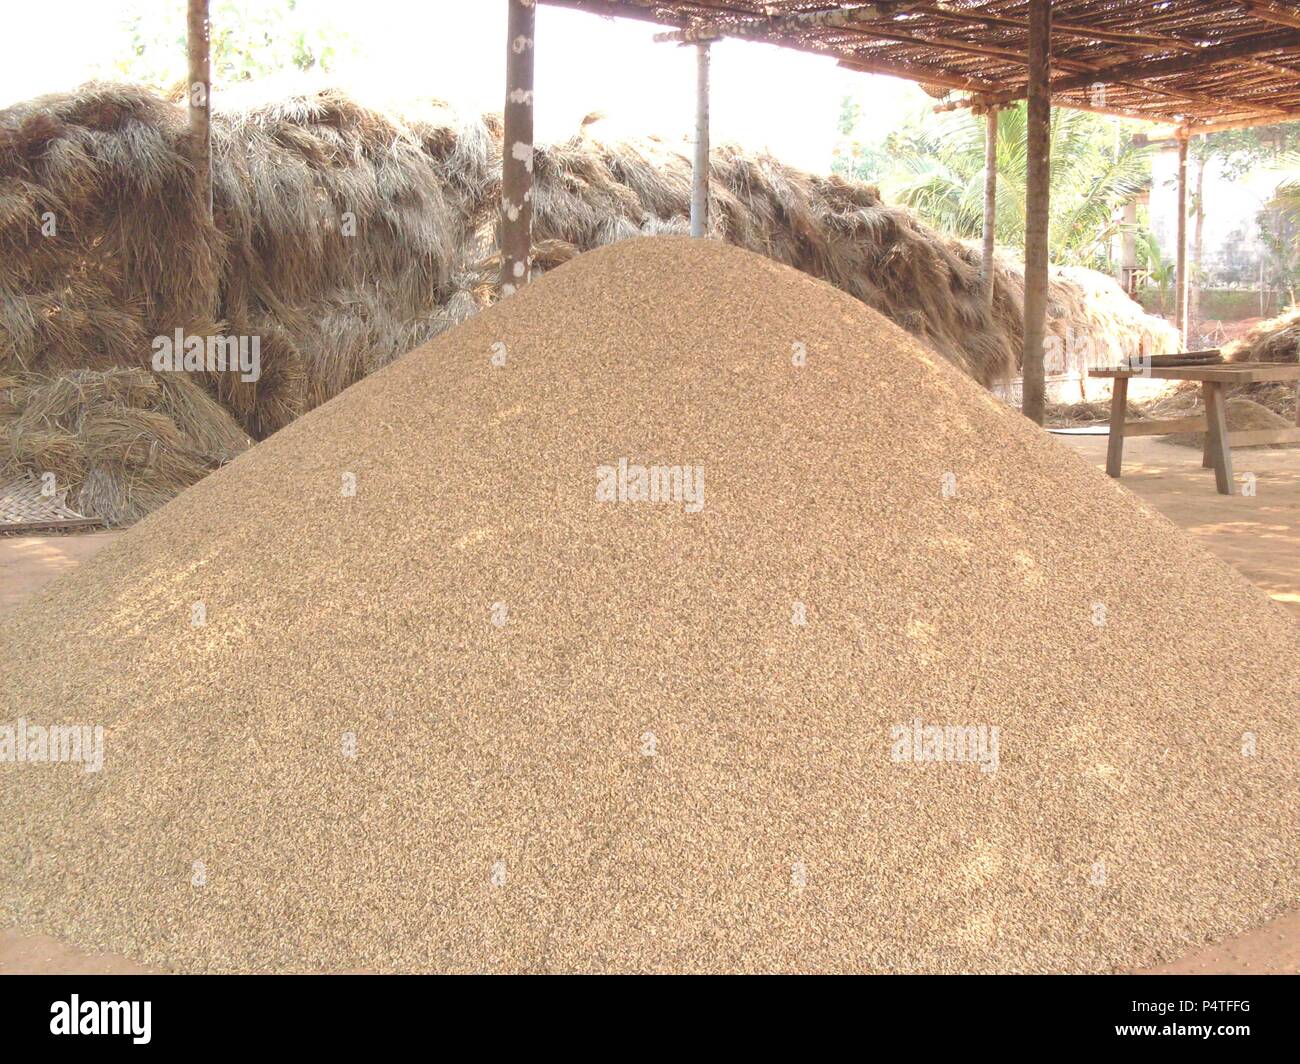 Indian Rice Production Stock Photo